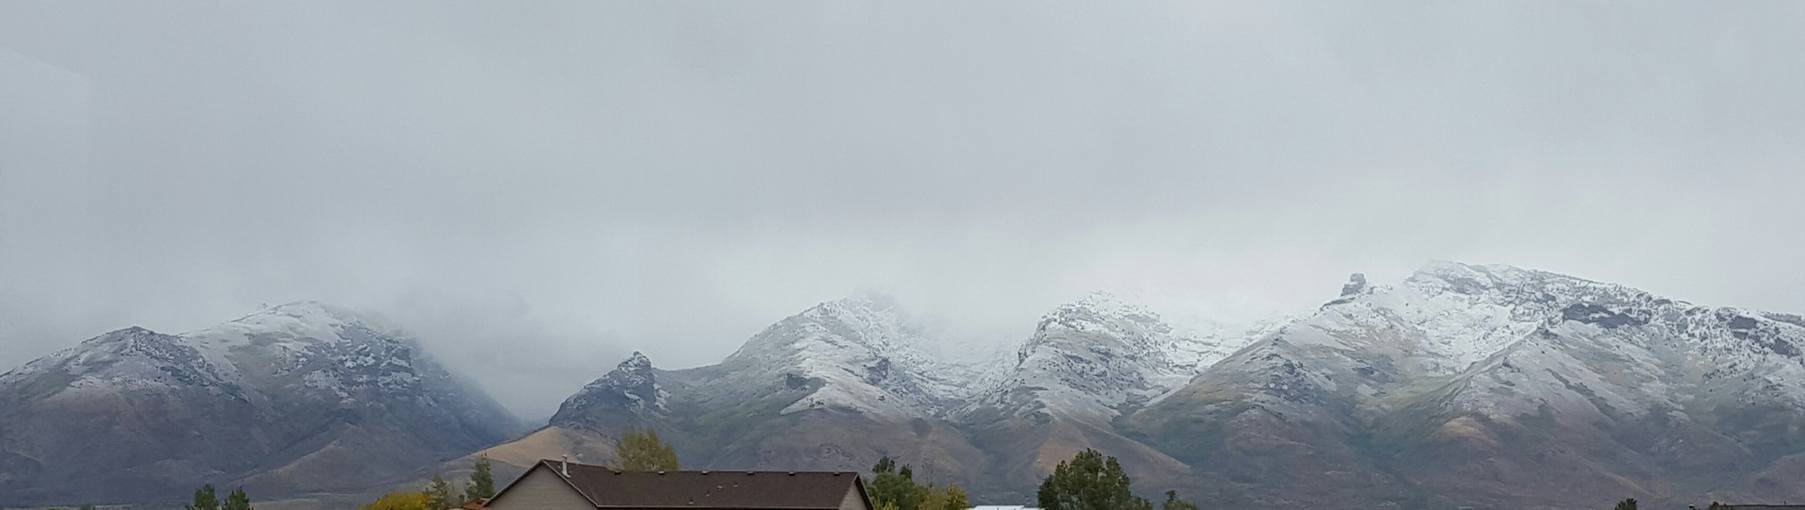 Snow on the Ruby Mountains, NV today. photo: wendy peterson